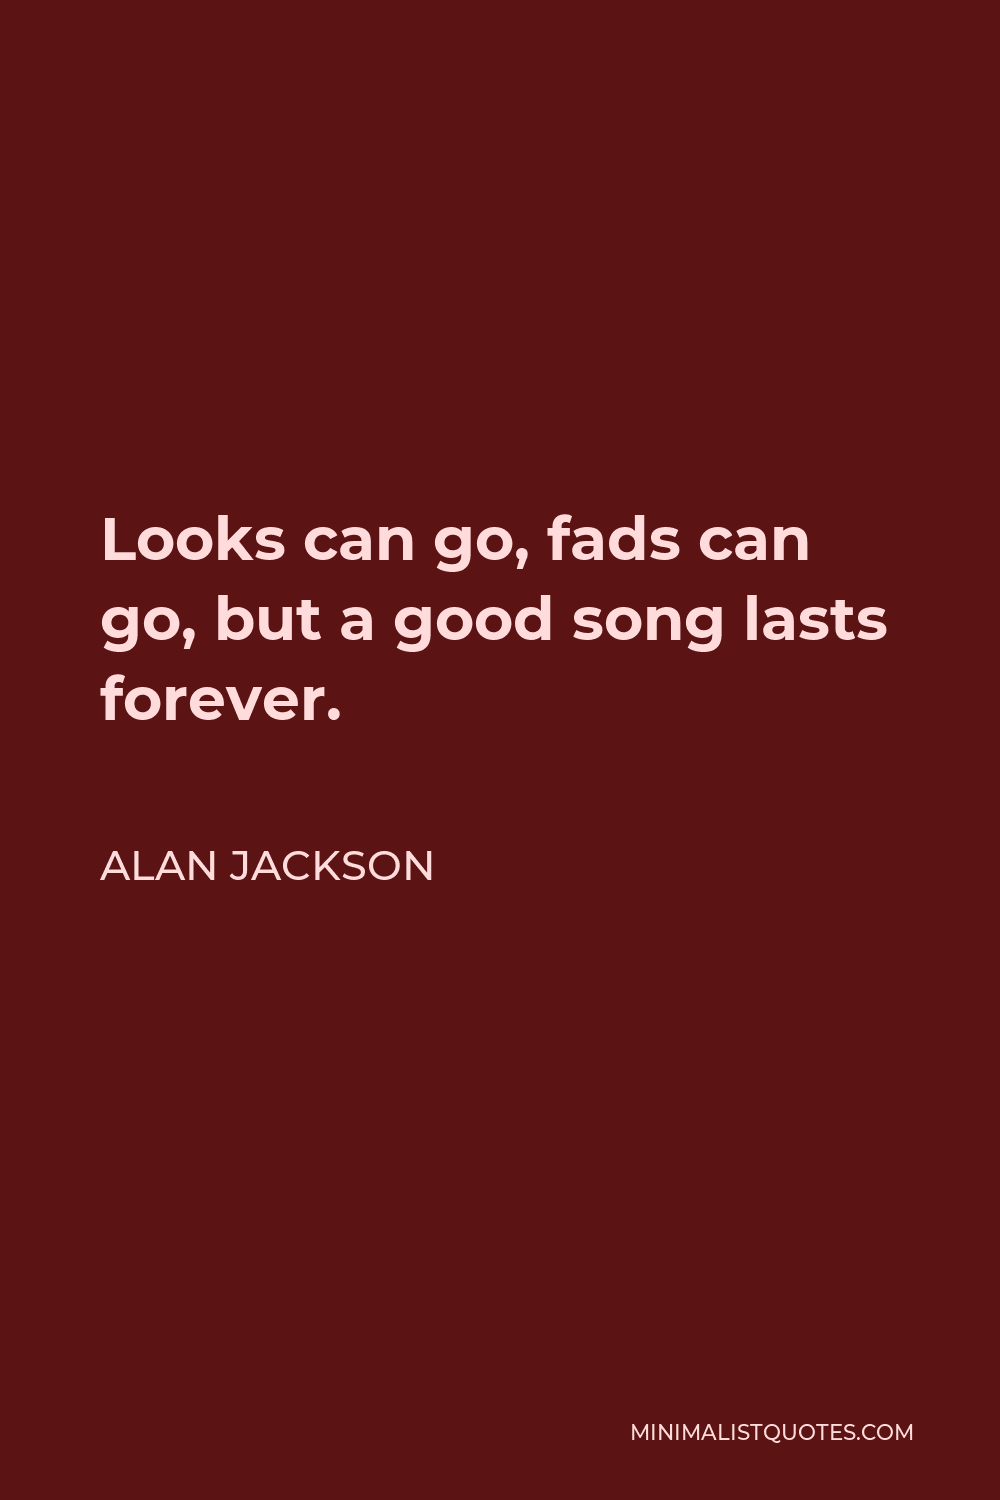 Alan Jackson Quote - Looks can go, fads can go, but a good song lasts forever.